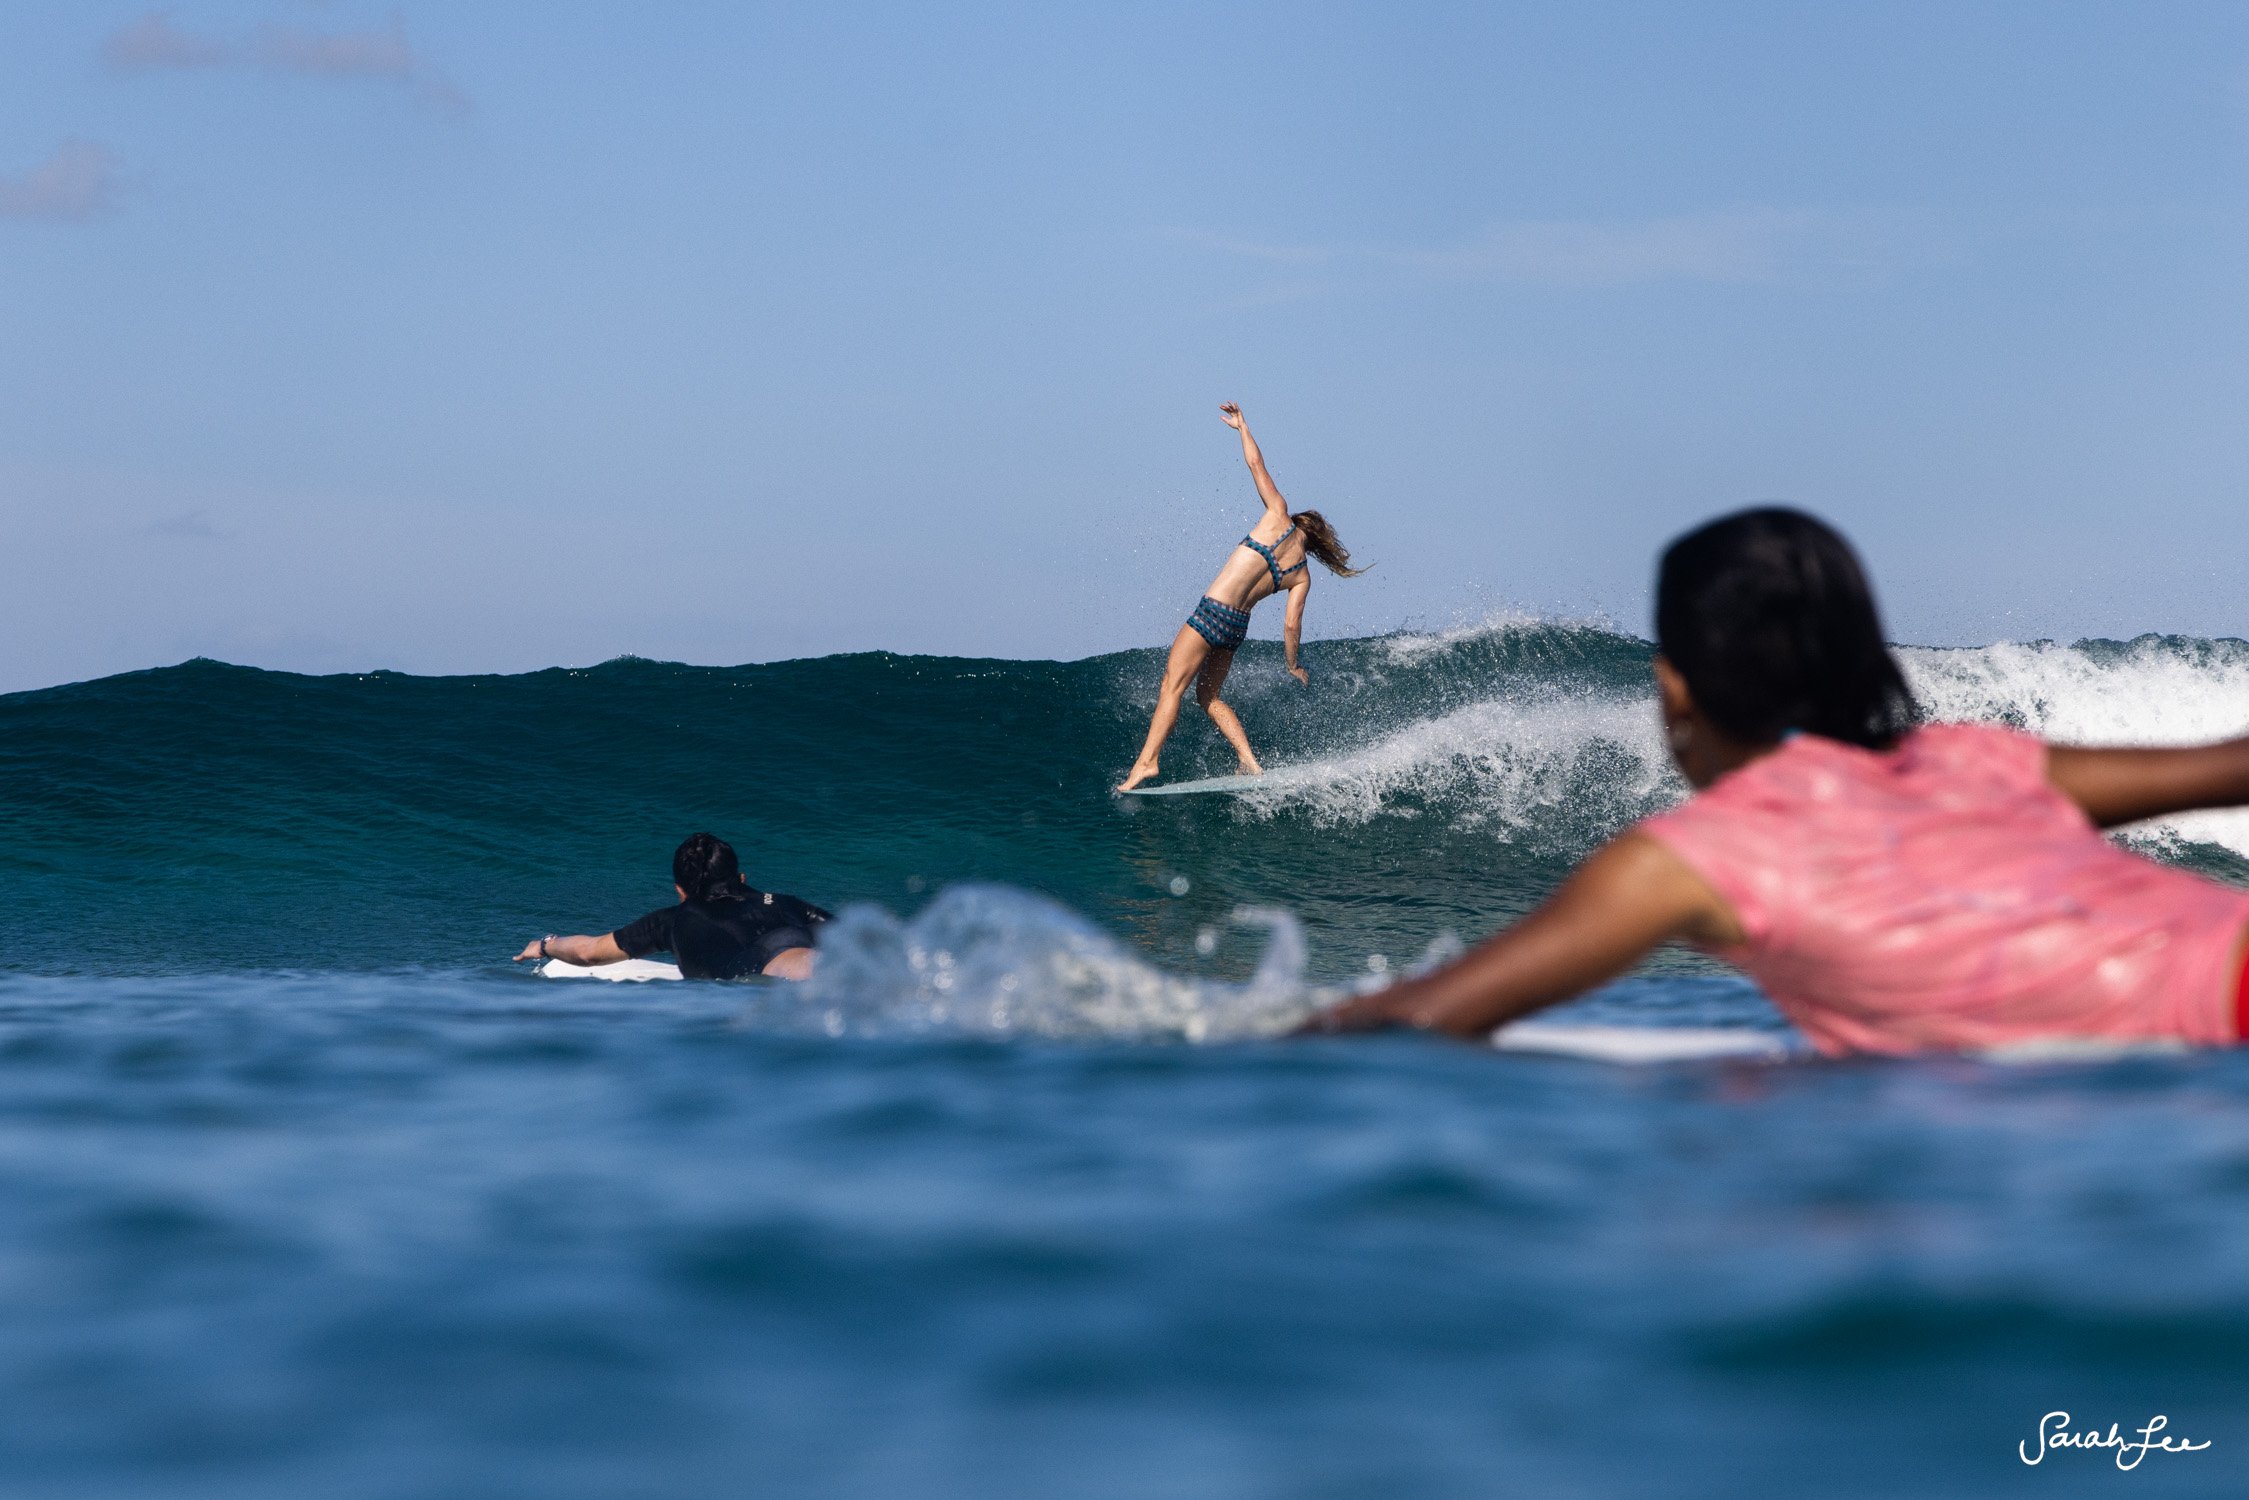 Expressive hang five by longboarder Leah Dawson